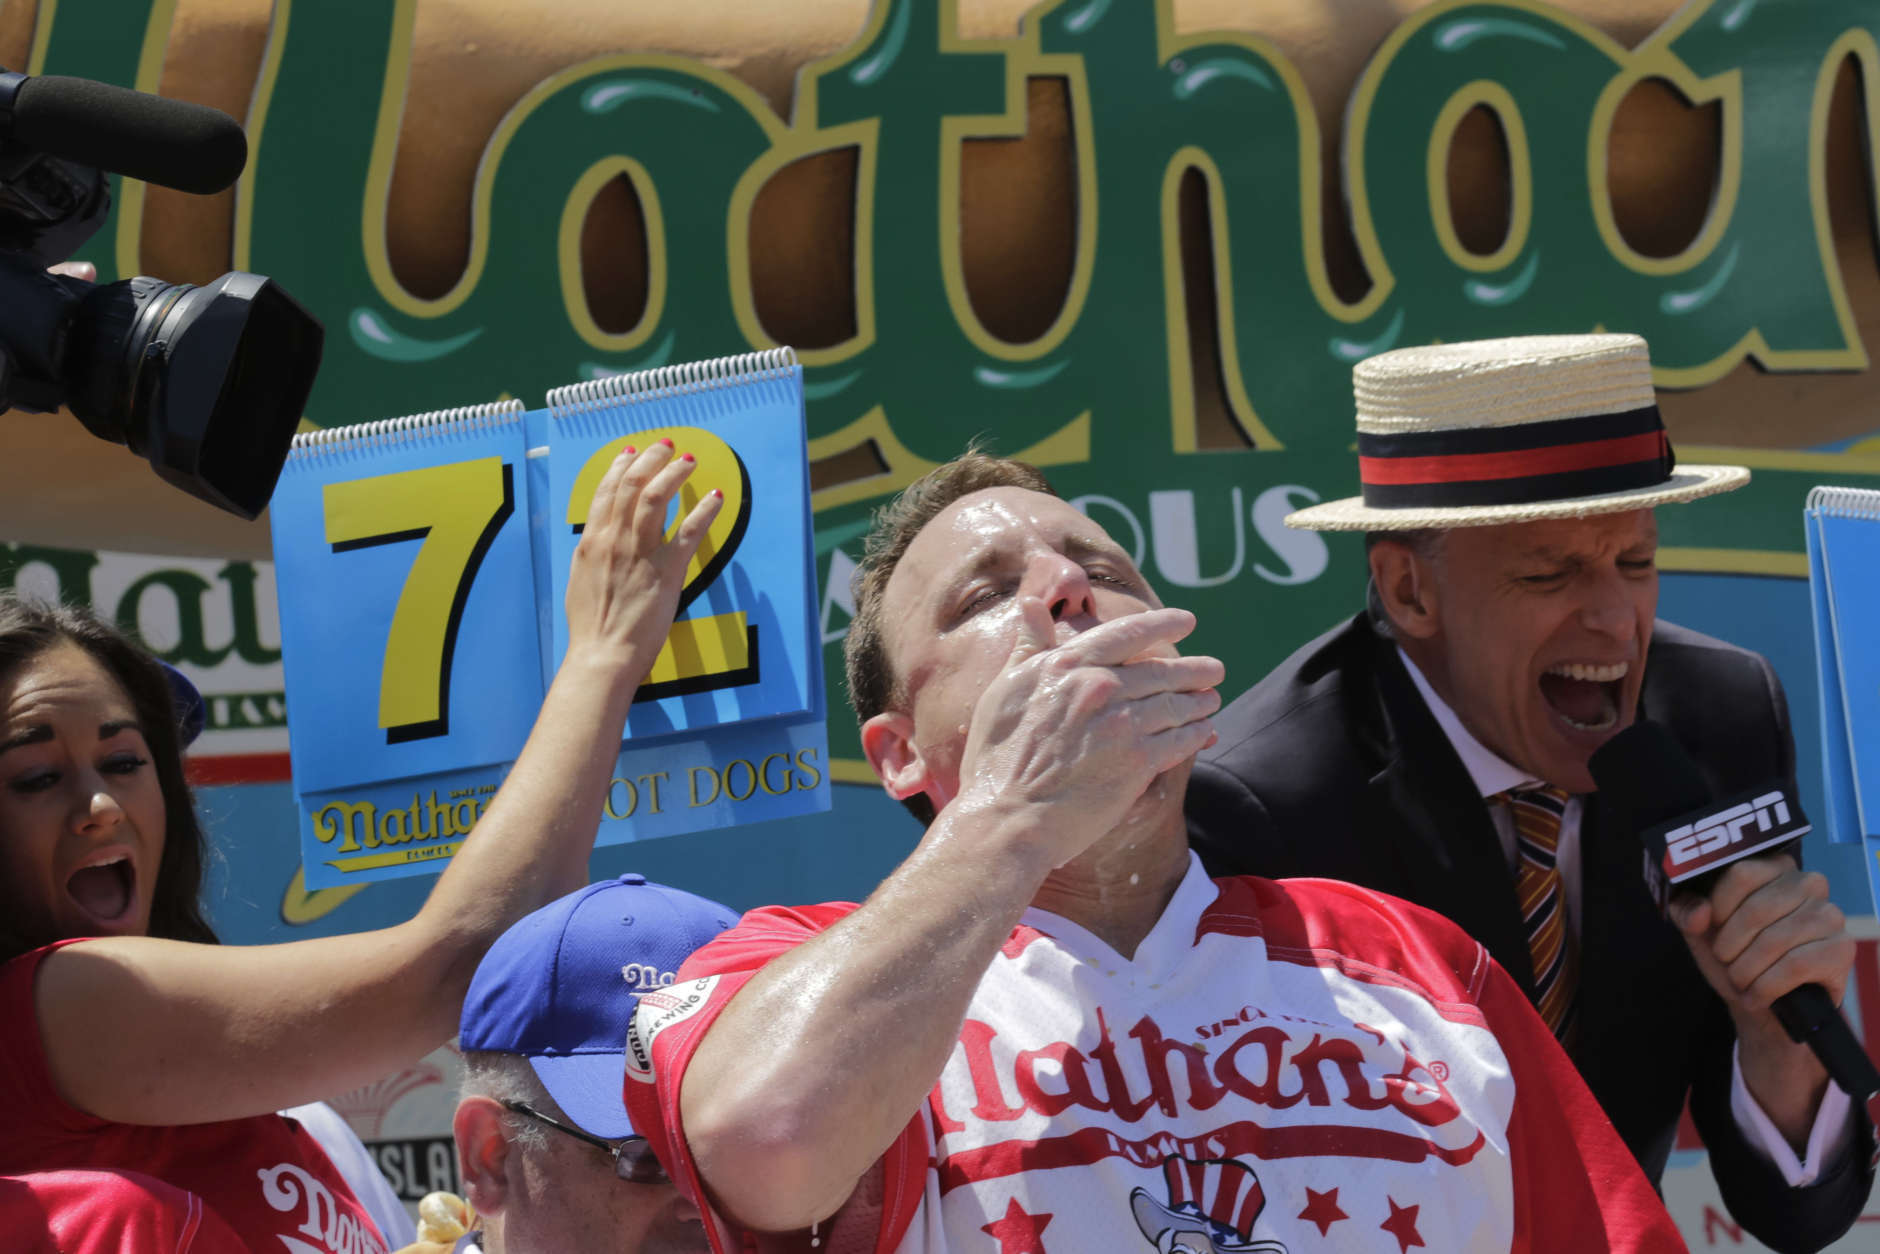 Joey Chestnut eats two hot dogs at a time during the Nathan's Annual Famous International Hot Dog Eating Contest, Tuesday July 4, 2017, in New York. Chestnut won, marking his 10th victory in the event. (AP Photo/Bebeto Matthews)